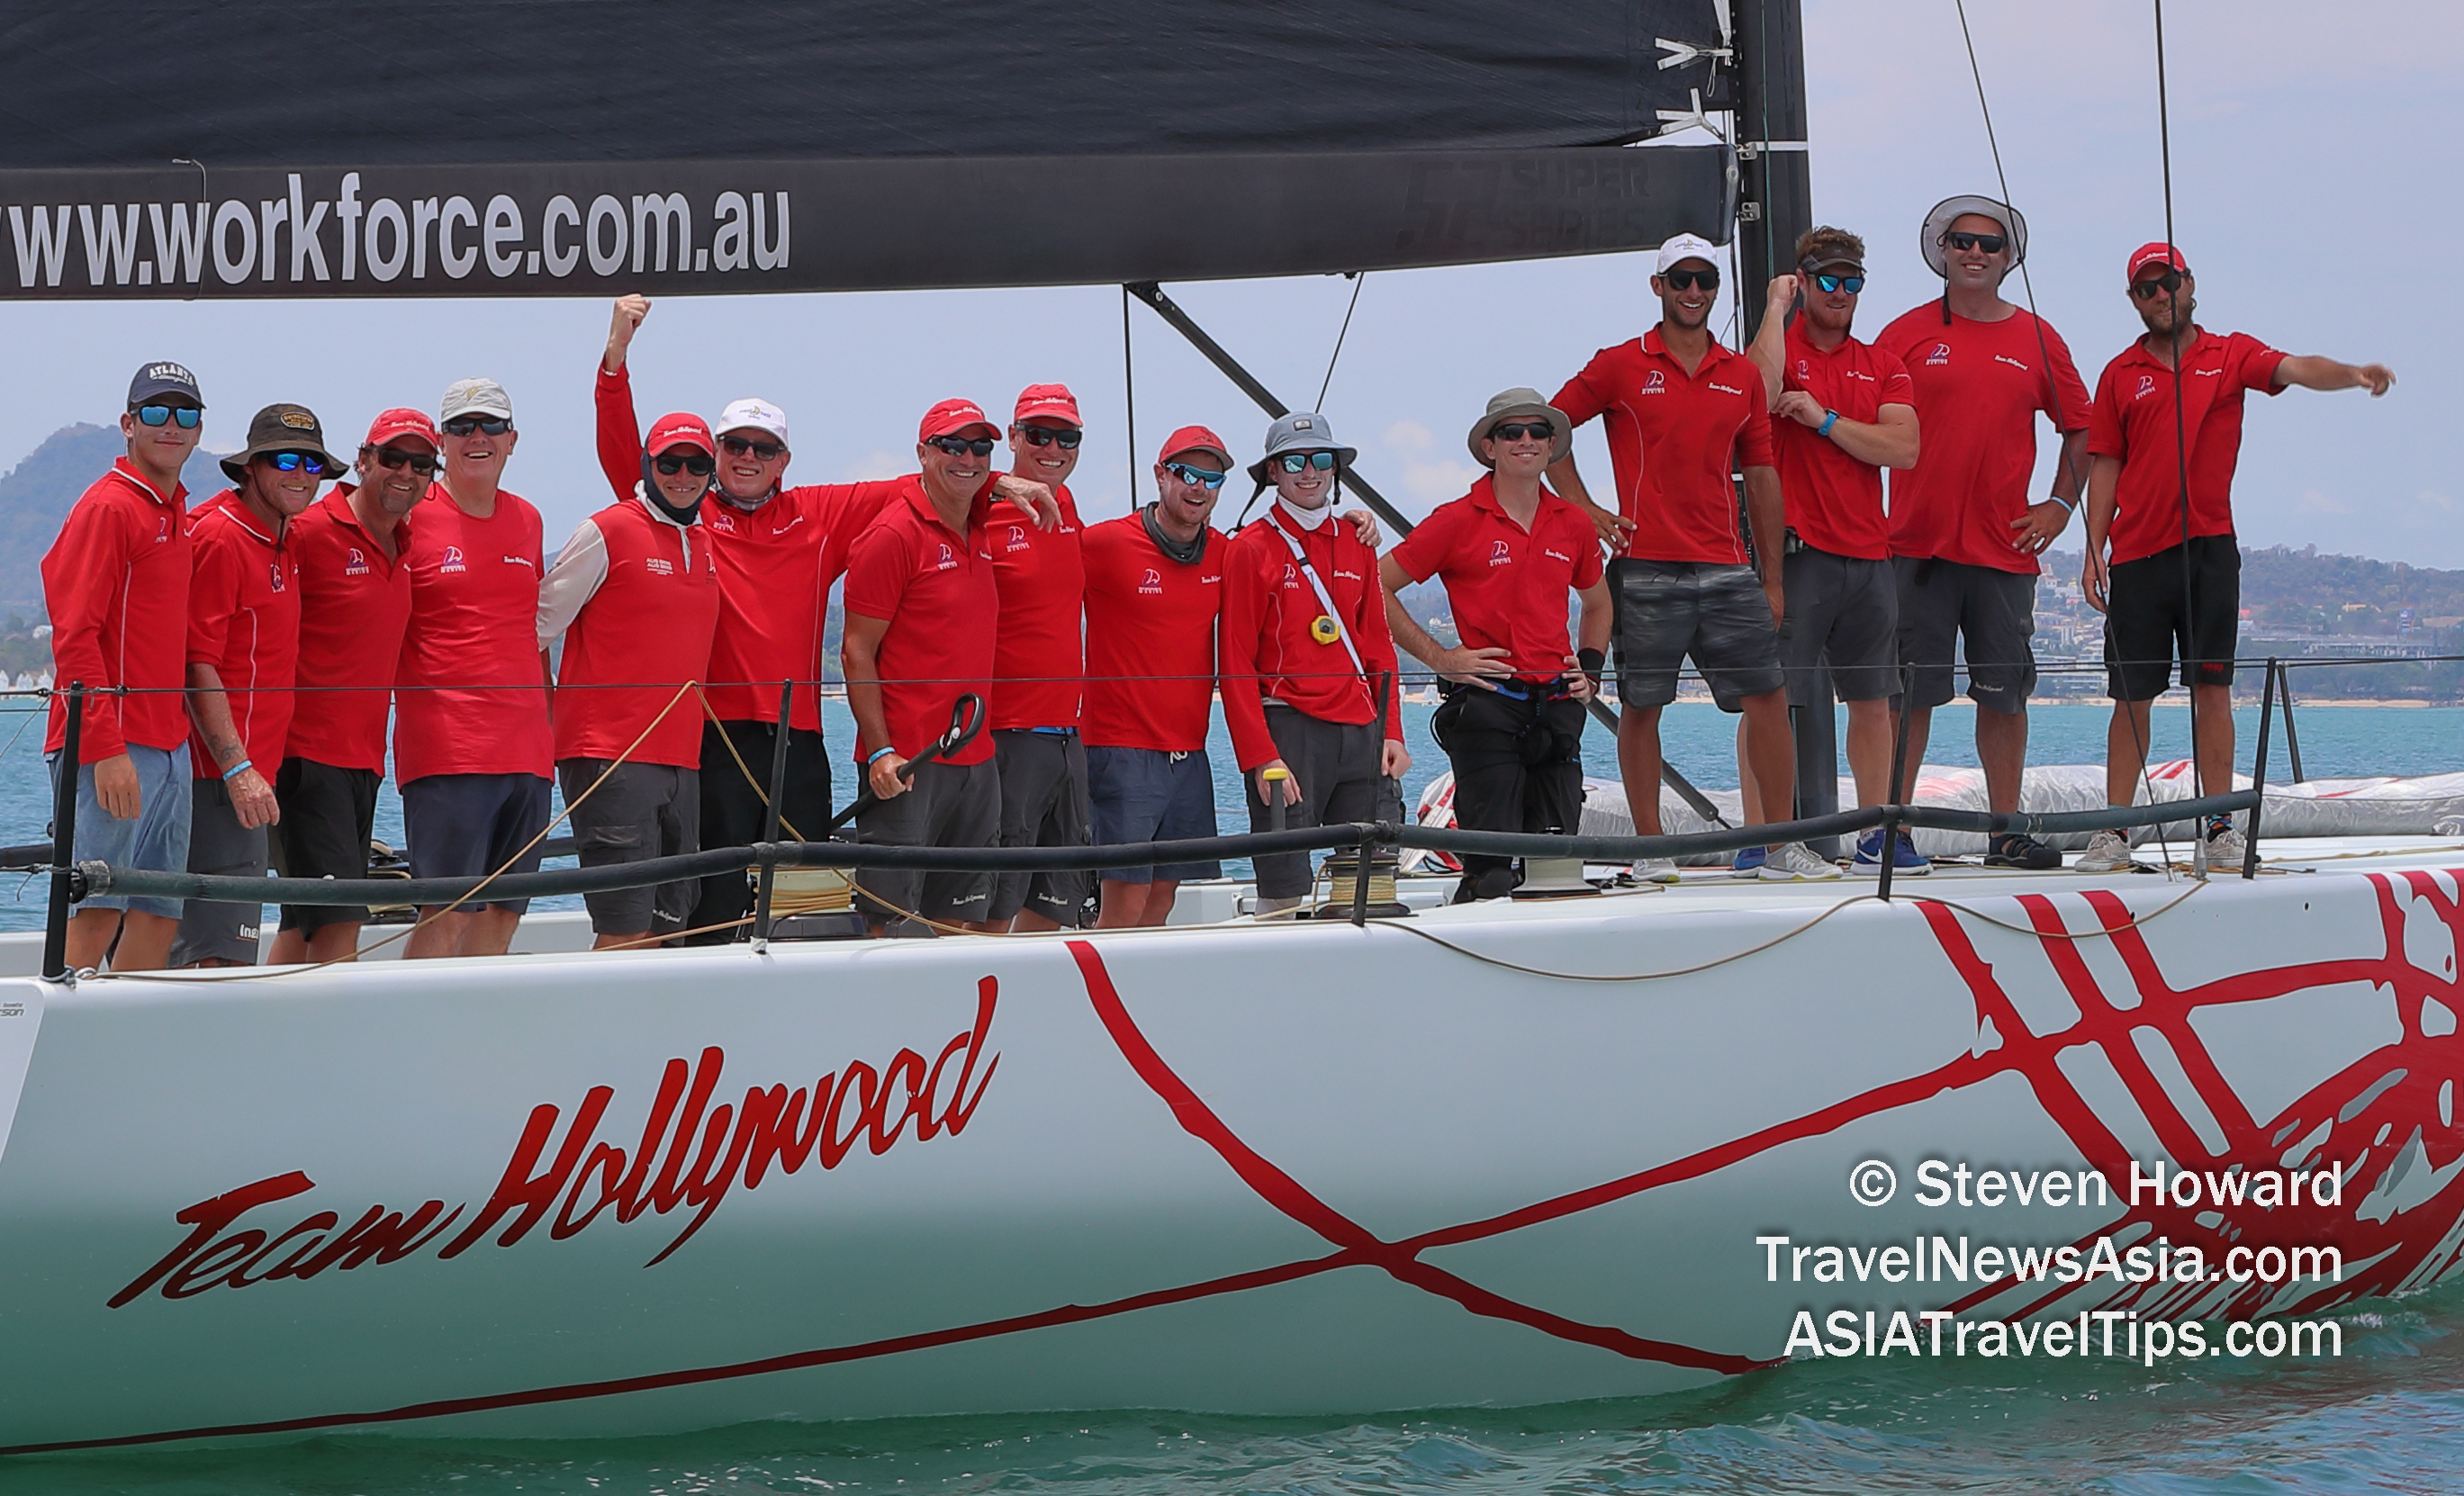 Unbeatable! Ray Roberts and crew on board the Team Hollywood TP52 yacht at Top of the Gulf Regatta 2019 in Pattaya, Thailand in May 2019. Picture by Steven Howard of TravelNewsAsia.com Click to enlarge.